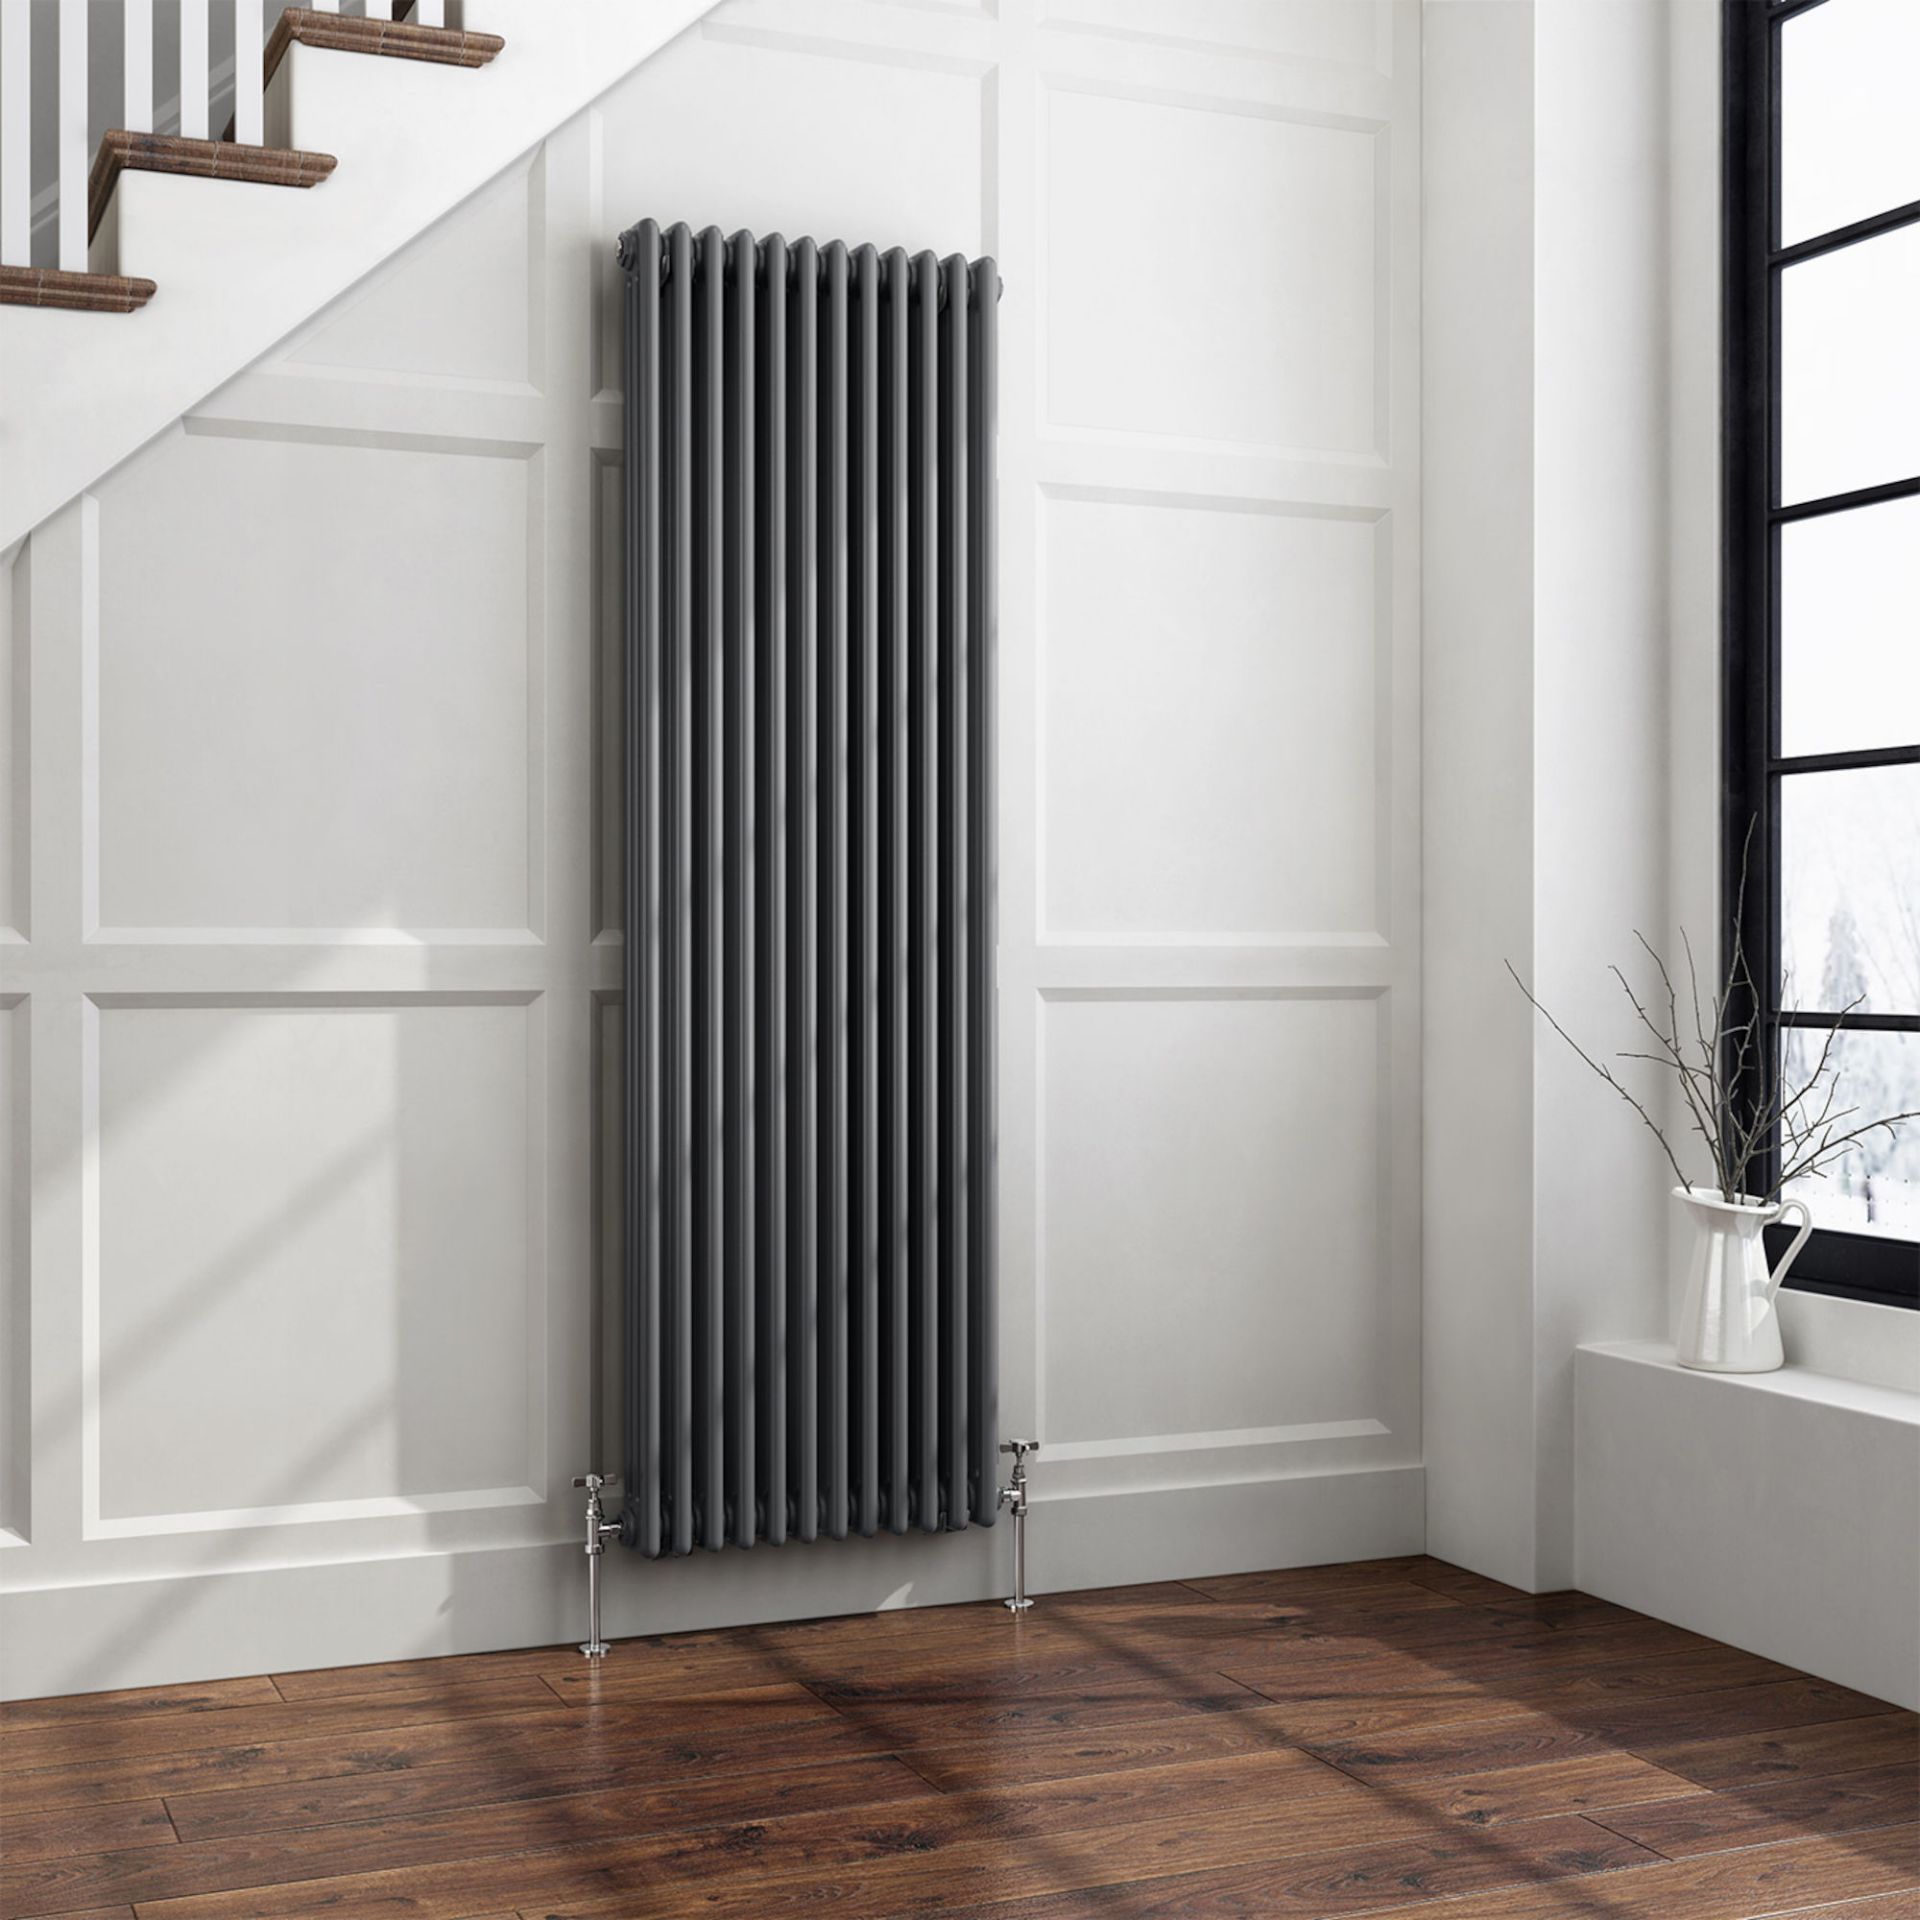 (CS19) 1800x558mm Anthracite Triple Panel Vertical Colosseum Traditional Radiator. RRP £619.99. Made - Image 3 of 4